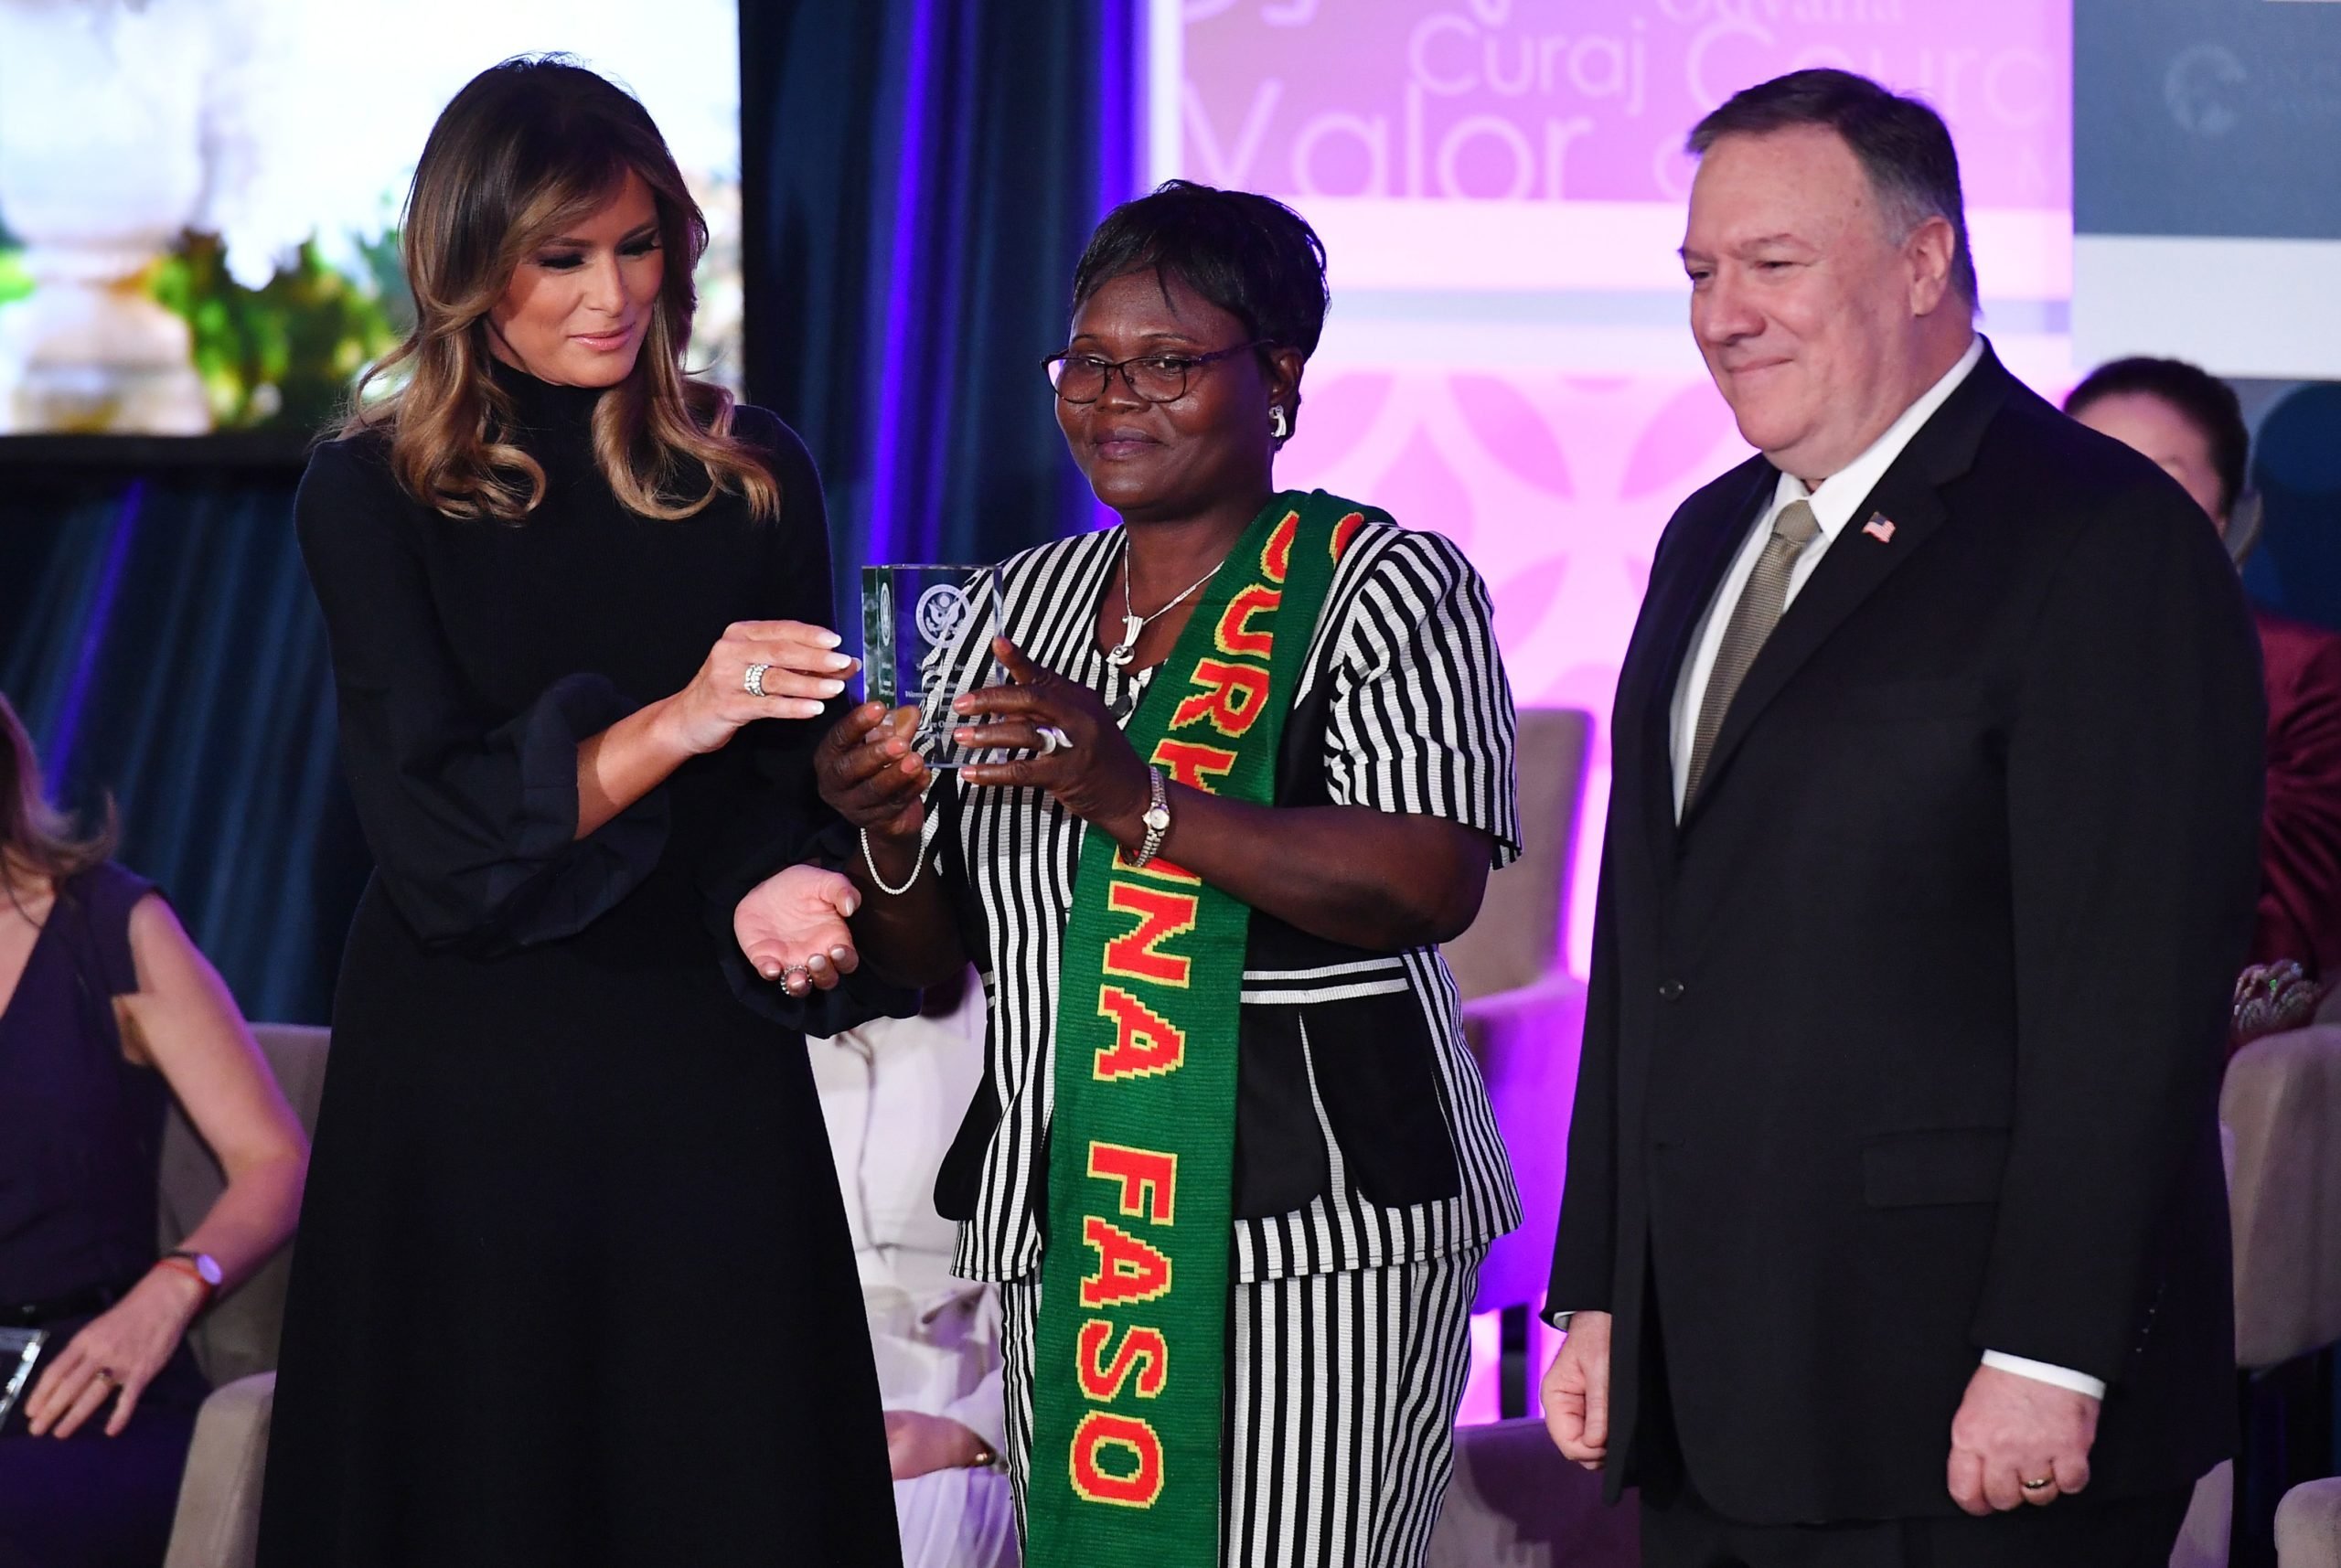 International Women of Courage (IWOC) Award recipient Claire Ouedraogo of Burkina Faso poses with US Secretary of State Mike Pompeo and First Lady Melania Trump at the State Department in Washington, DC on March 4, 2020. (Mandel Ngan/AFP via Getty Images)